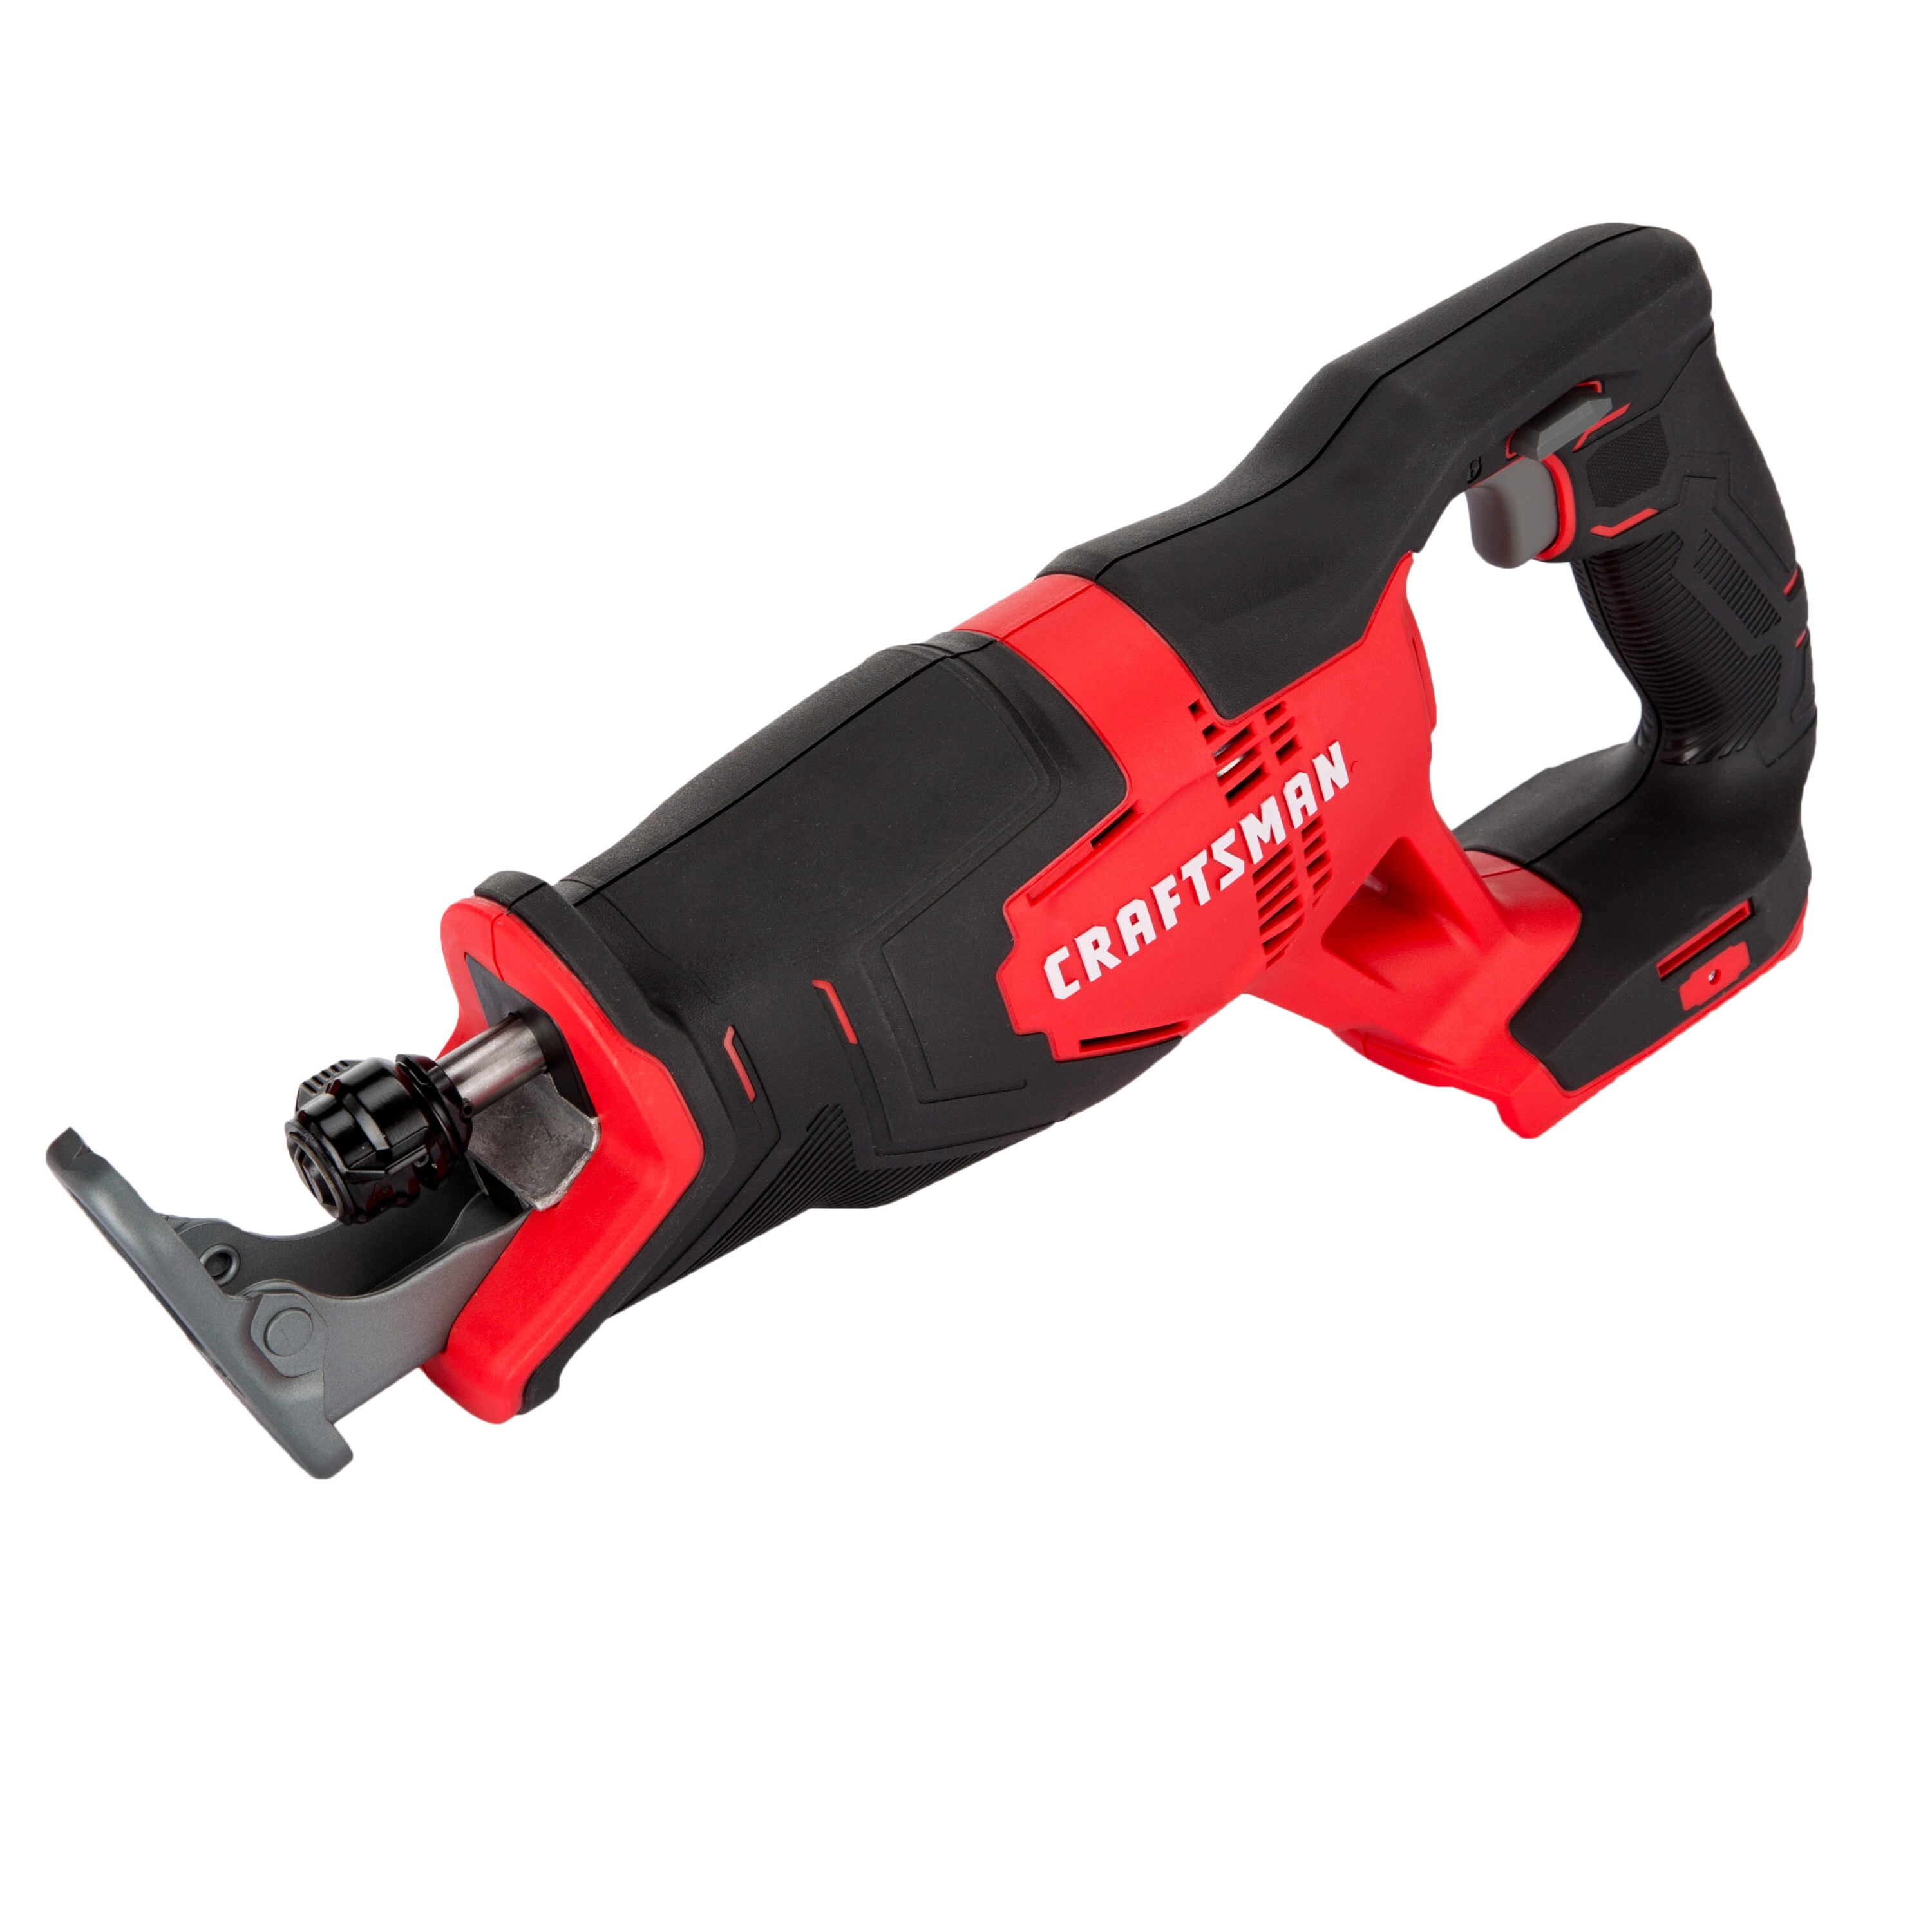 CRAFTSMAN V20 4-Tool Power Tool Combo Kit with Soft Case (Li-ion Batteries  and Charger Included) in the Power Tool Combo Kits department at